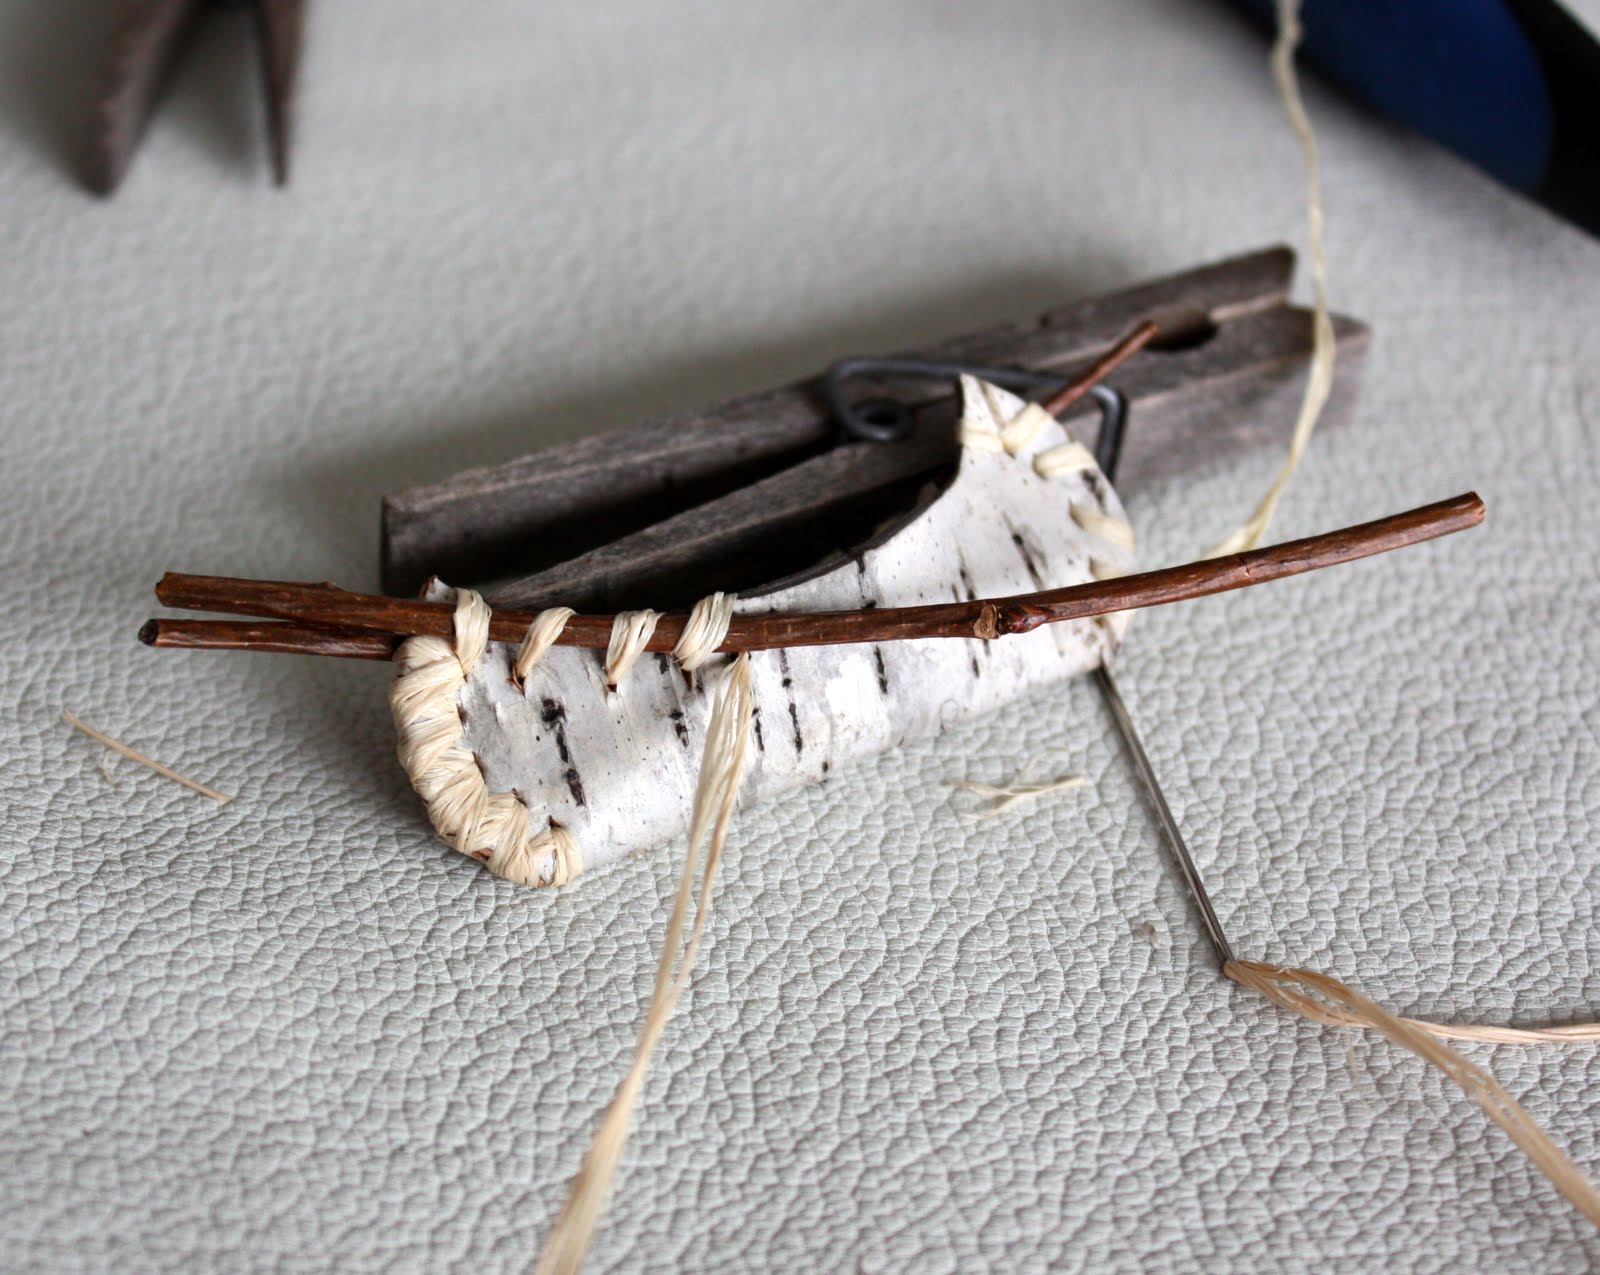  small knot at the end. Trim any excess twig and you have a canoe